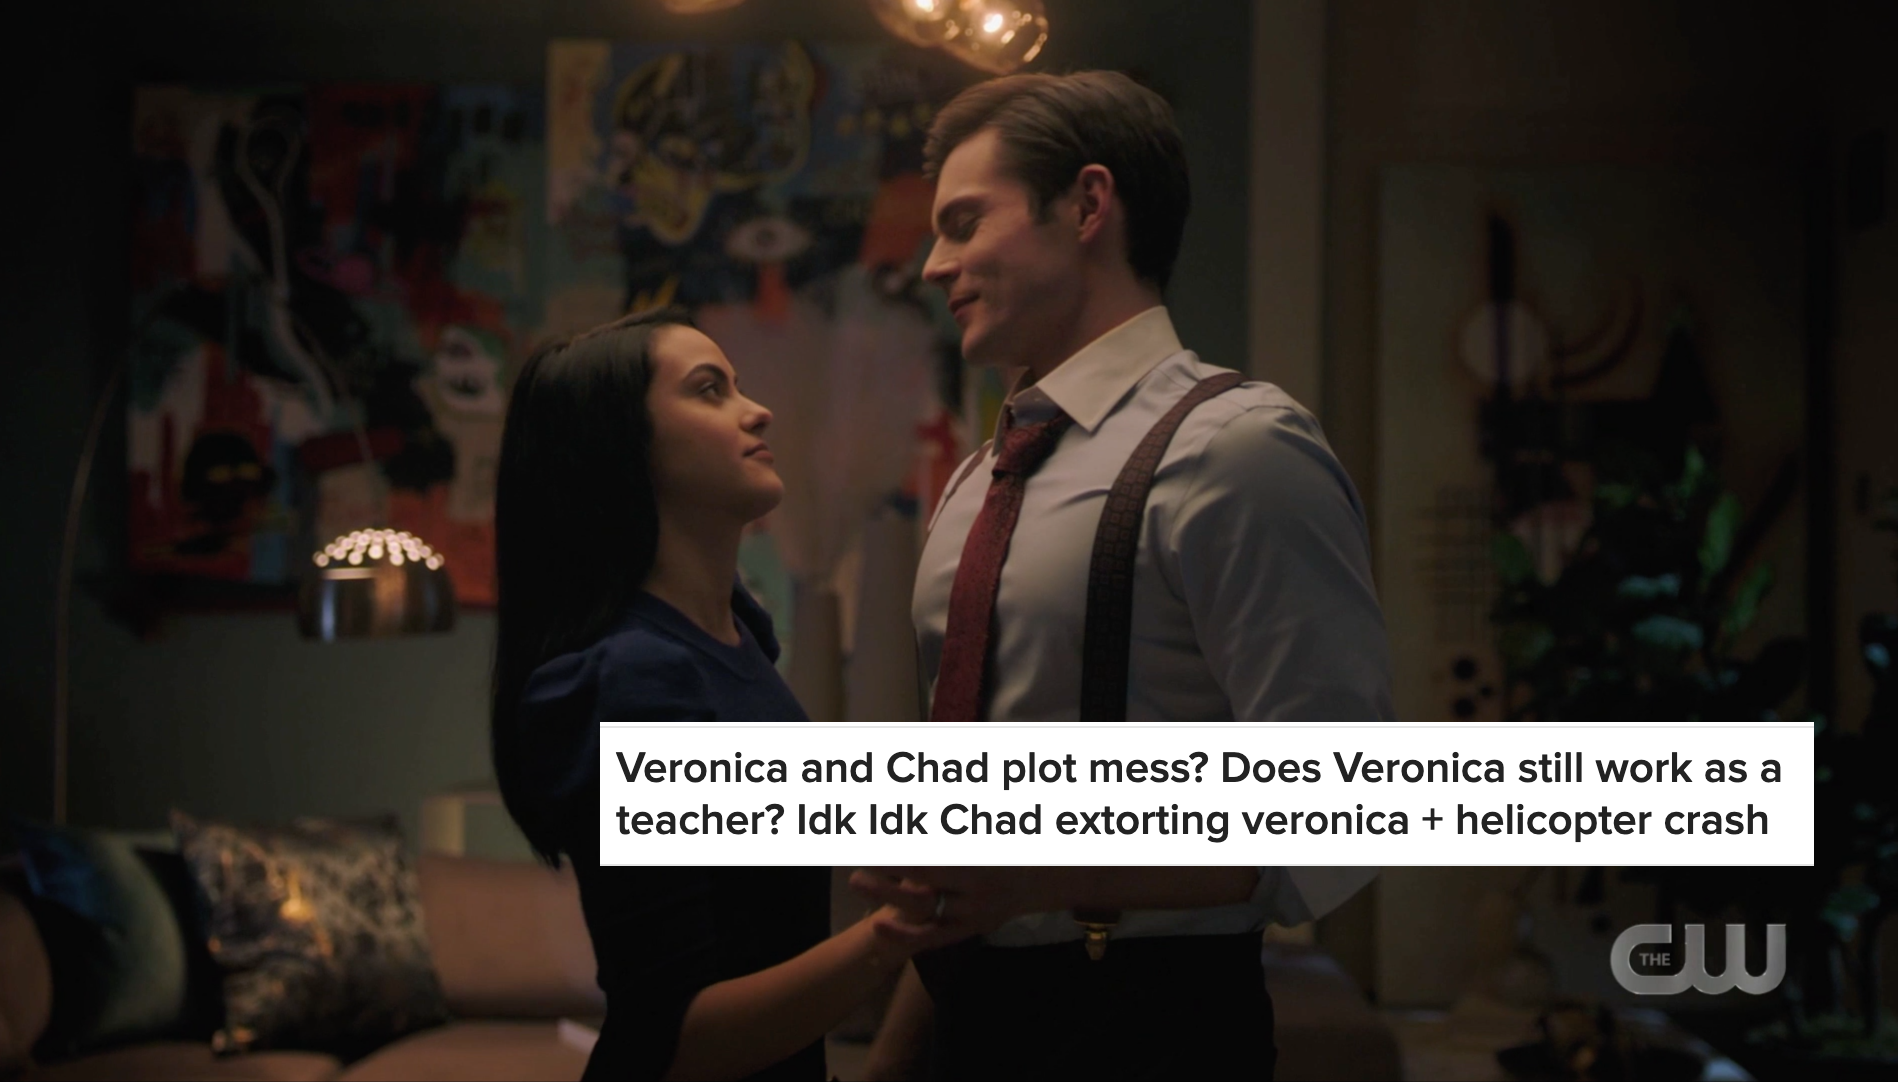 Chad and Veronica with notes about their plot line and Chard extorting Veronica